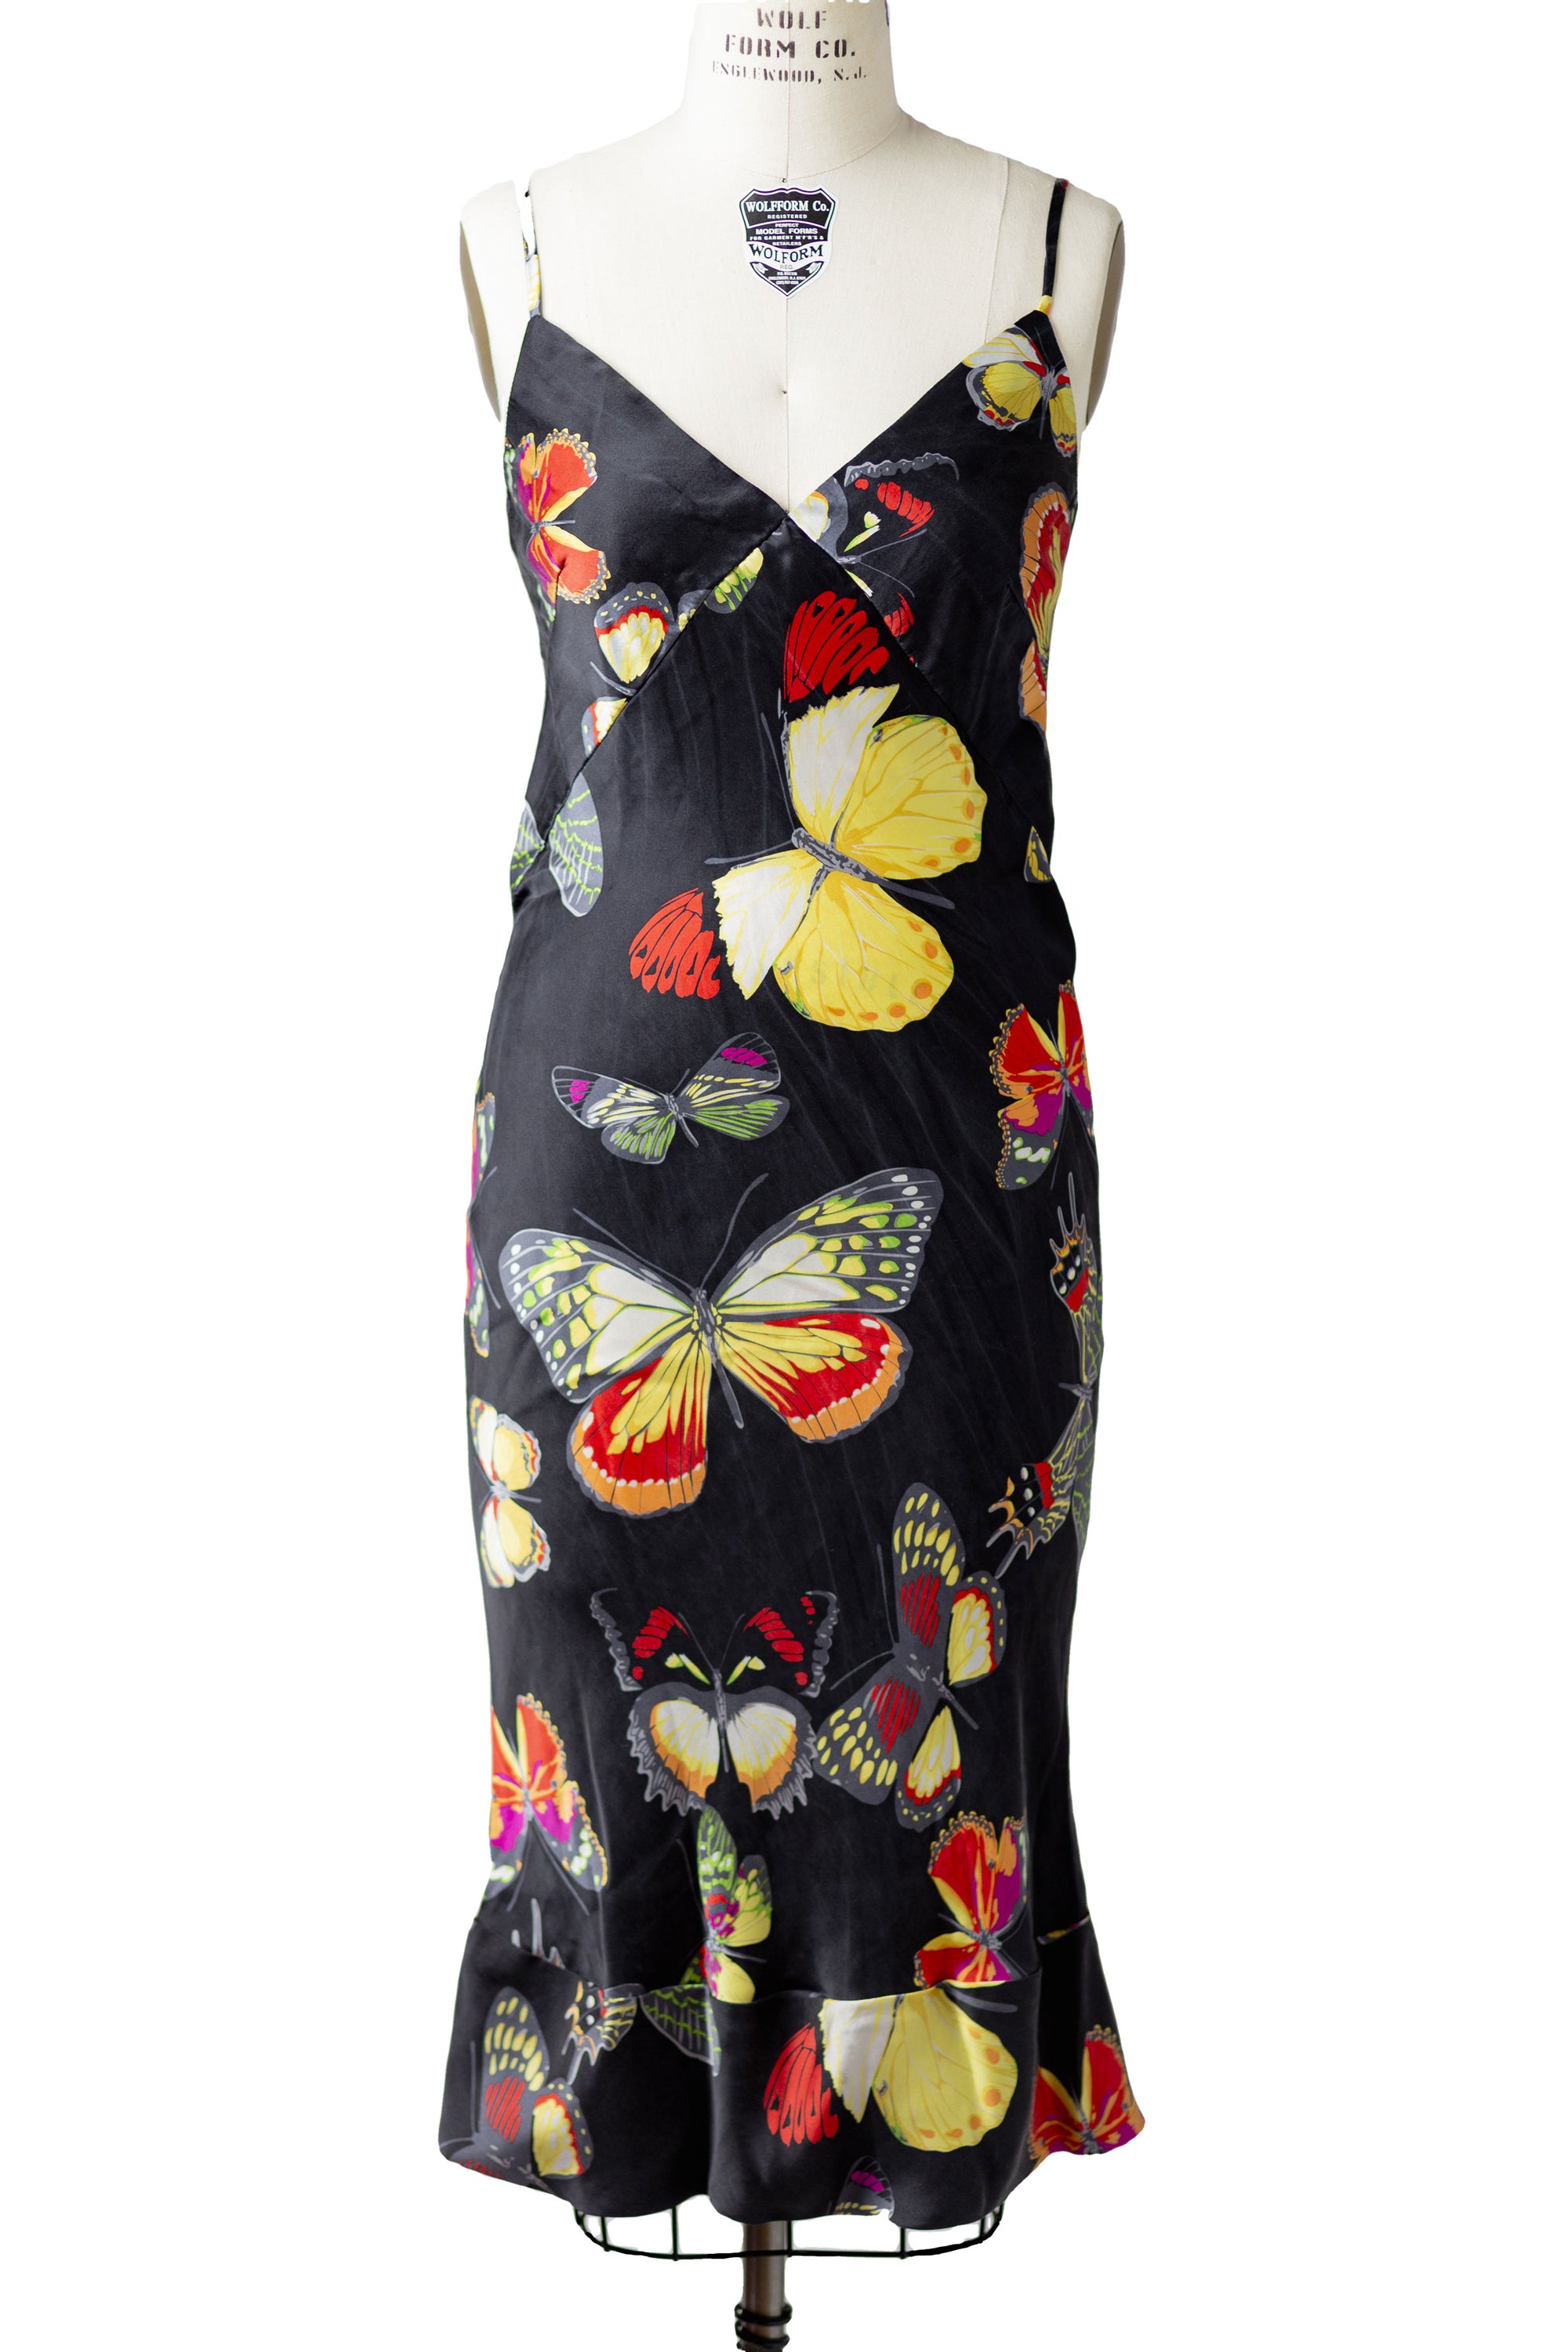 Signature Dress - Printed Silk Charmeuse - Butterfly on Black patter - Front